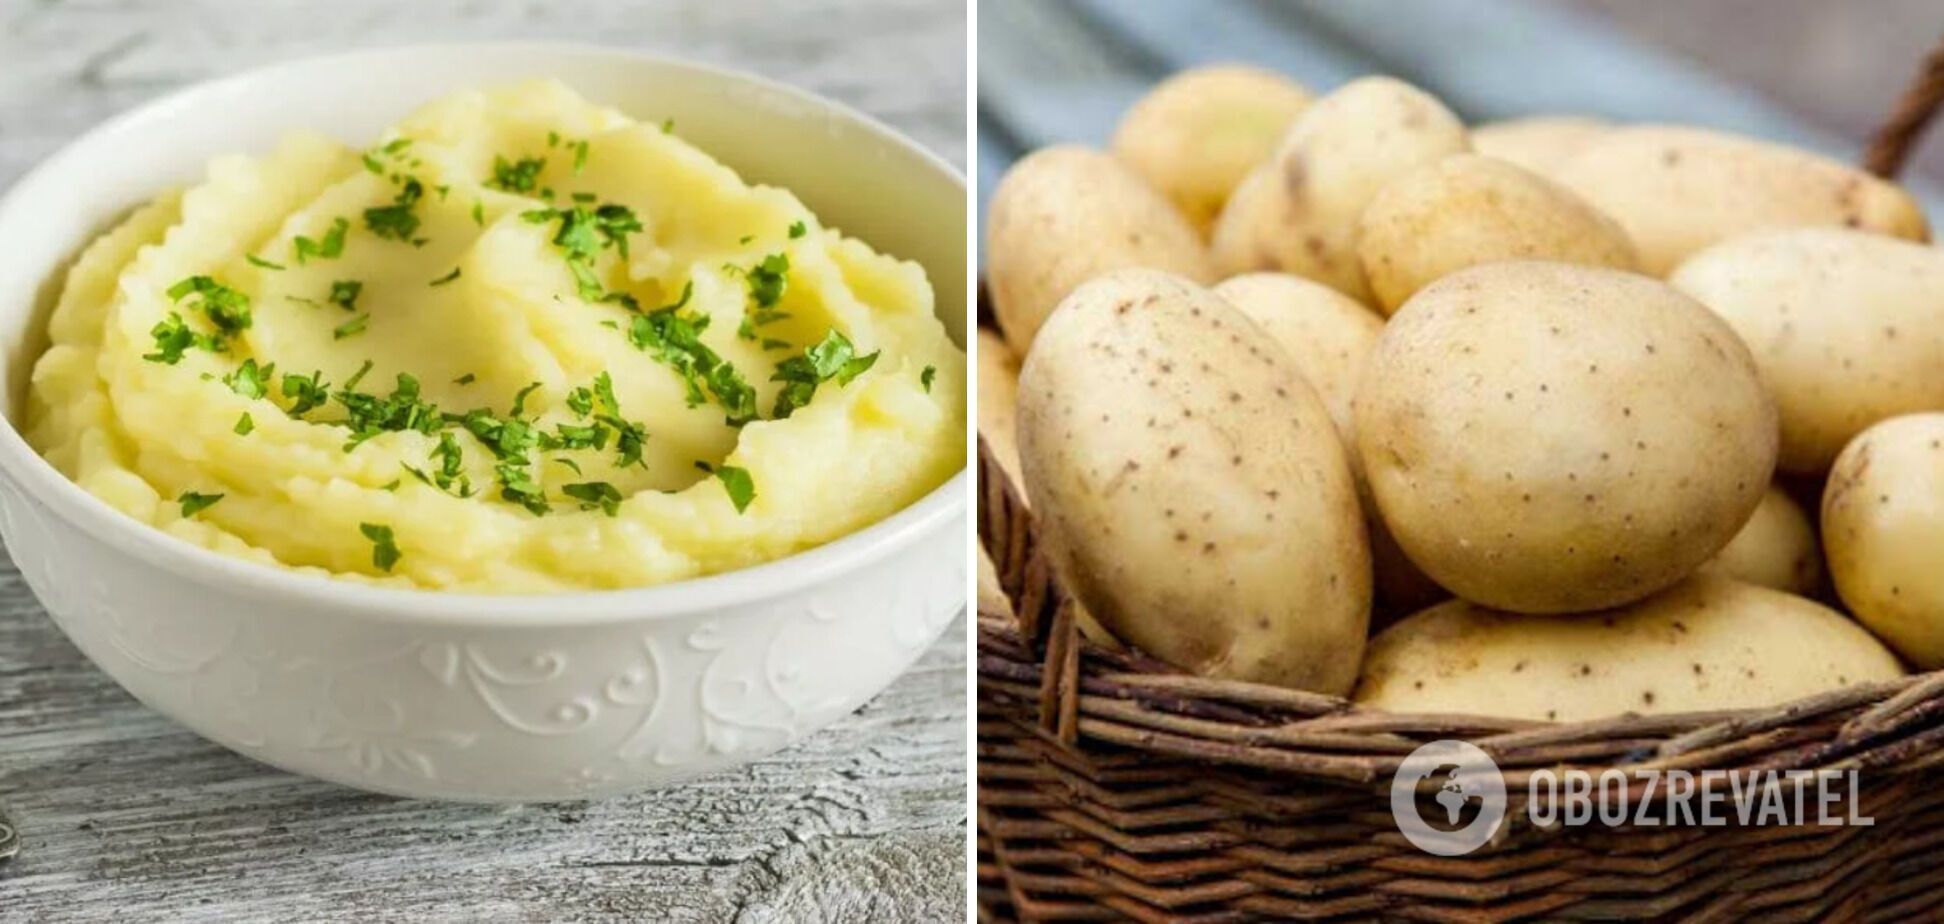 What to add to potato zrazy to make them golden: a simple dish